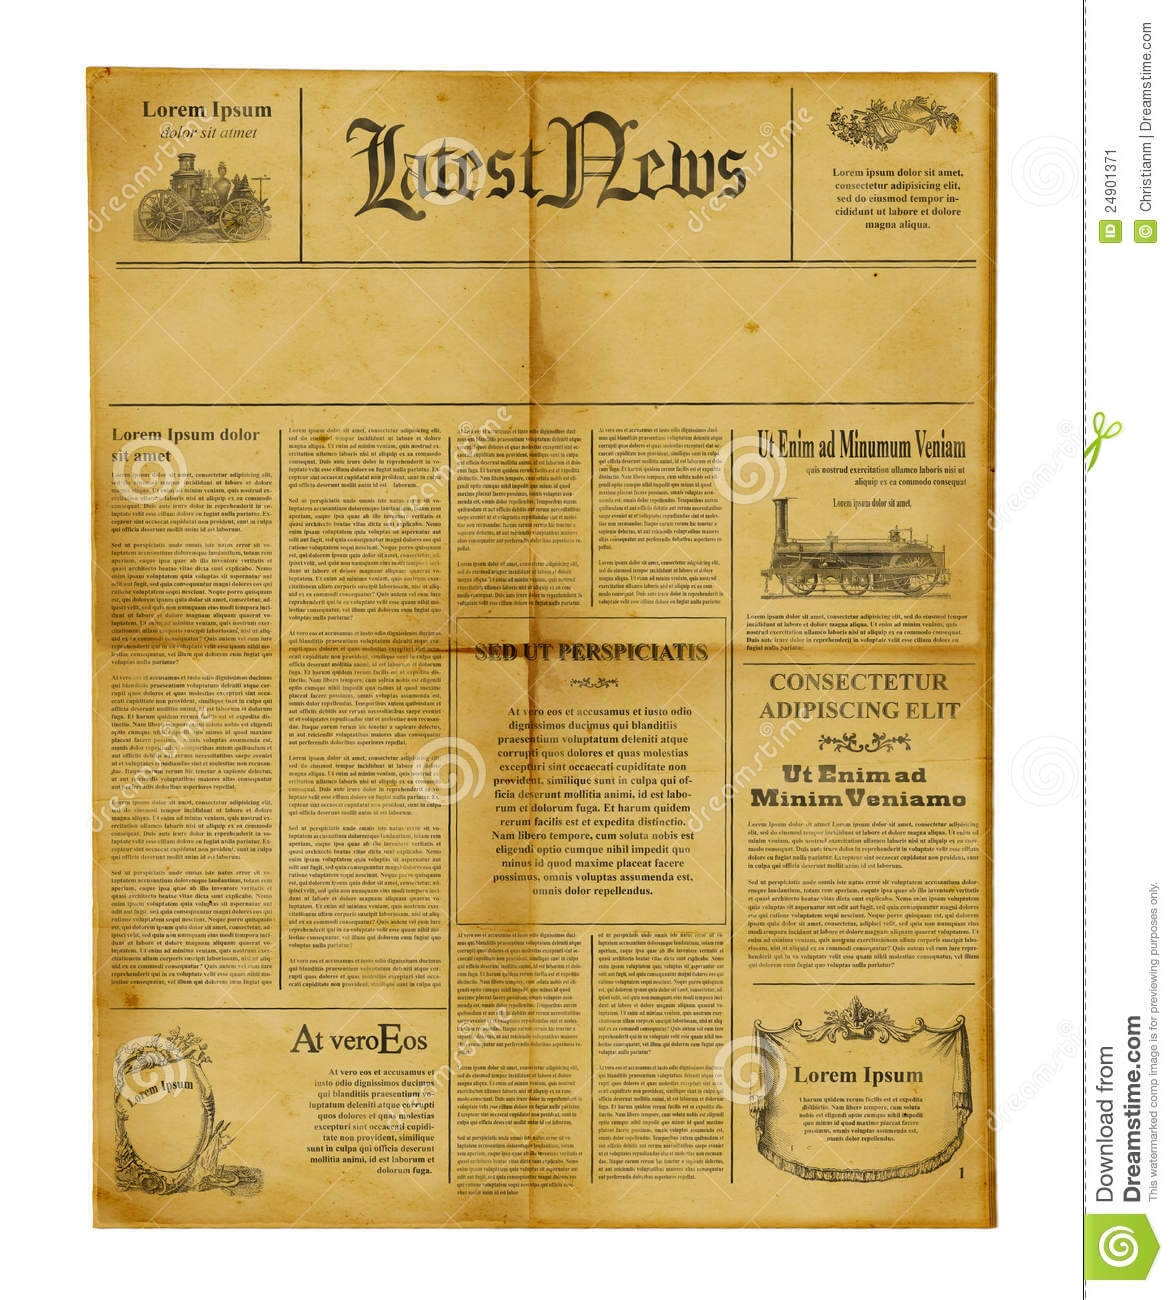 microsoft word old newspaper template free download